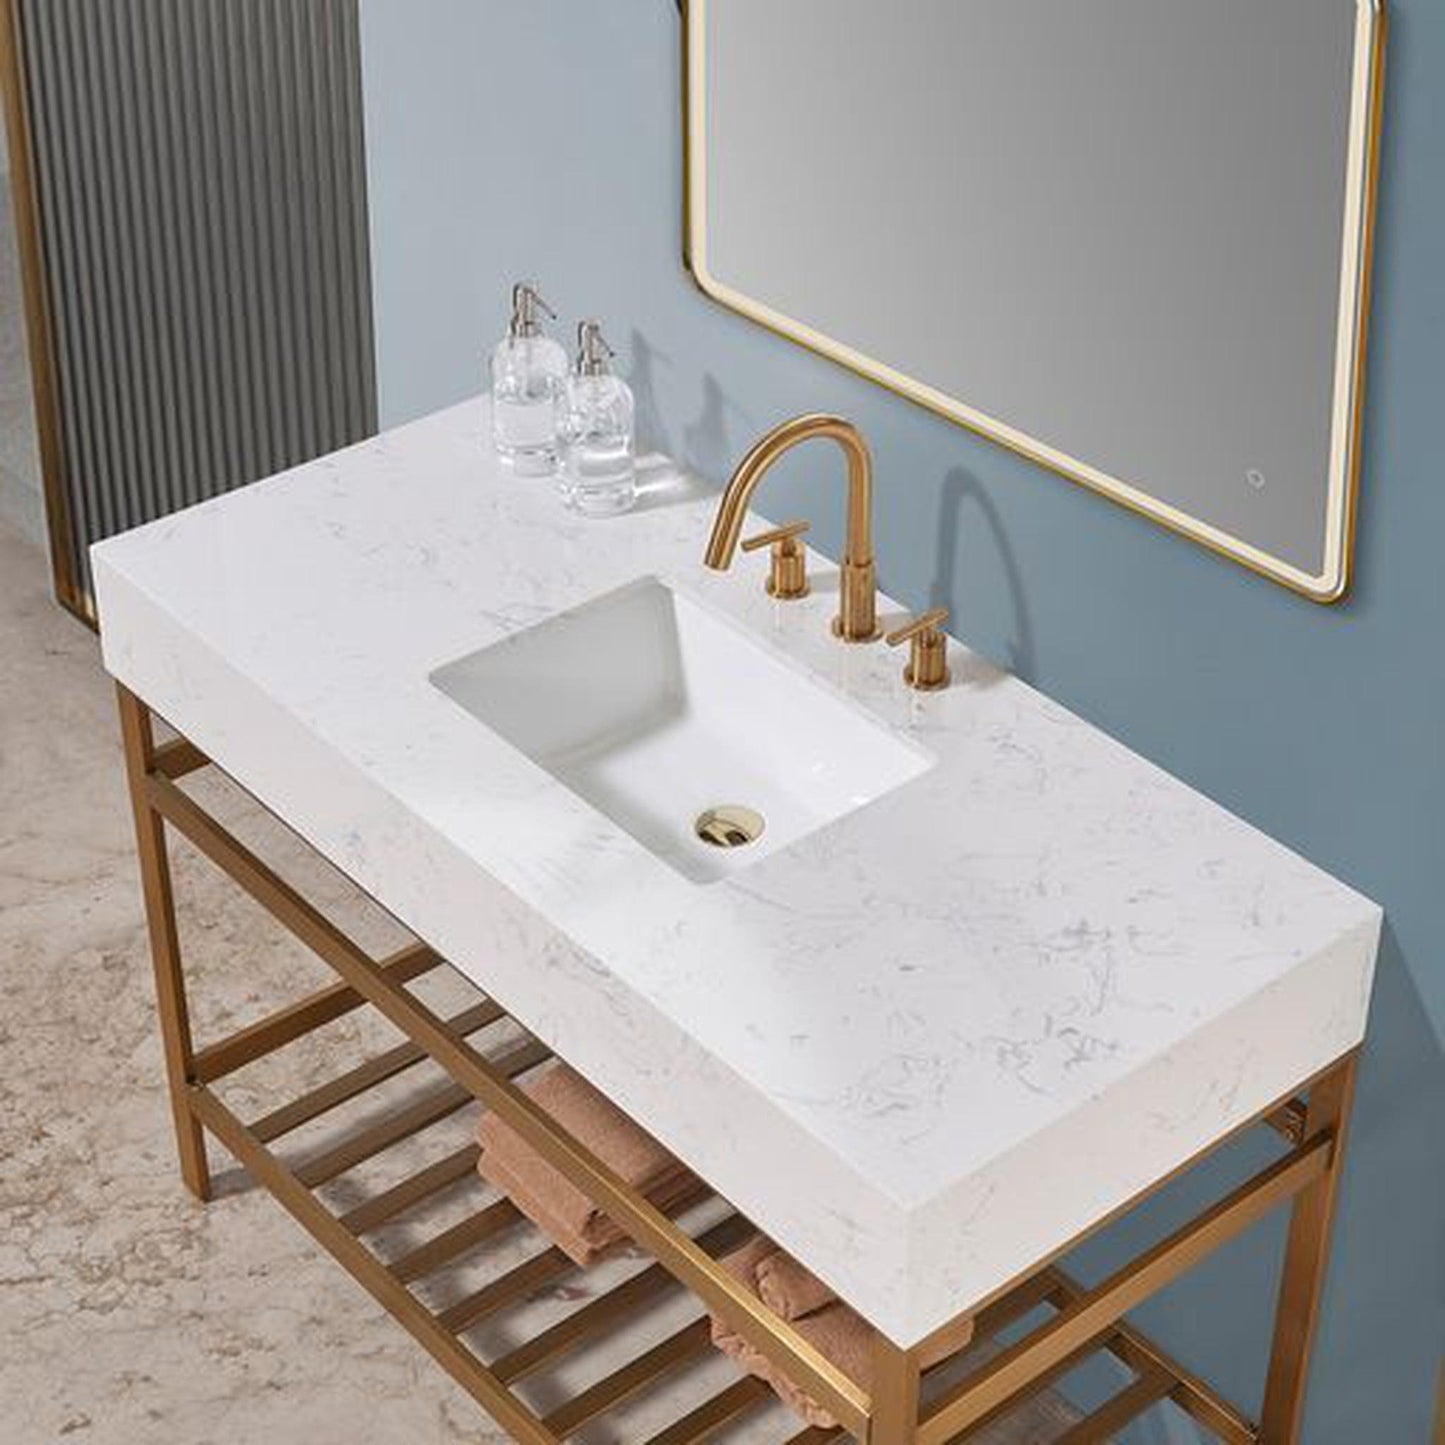 Altair Merano 48" Brushed Gold Single Stainless Steel Bathroom Vanity Set Console With Mirror, Aosta White Stone Top, Single Rectangular Undermount Ceramic Sink, and Safety Overflow Hole